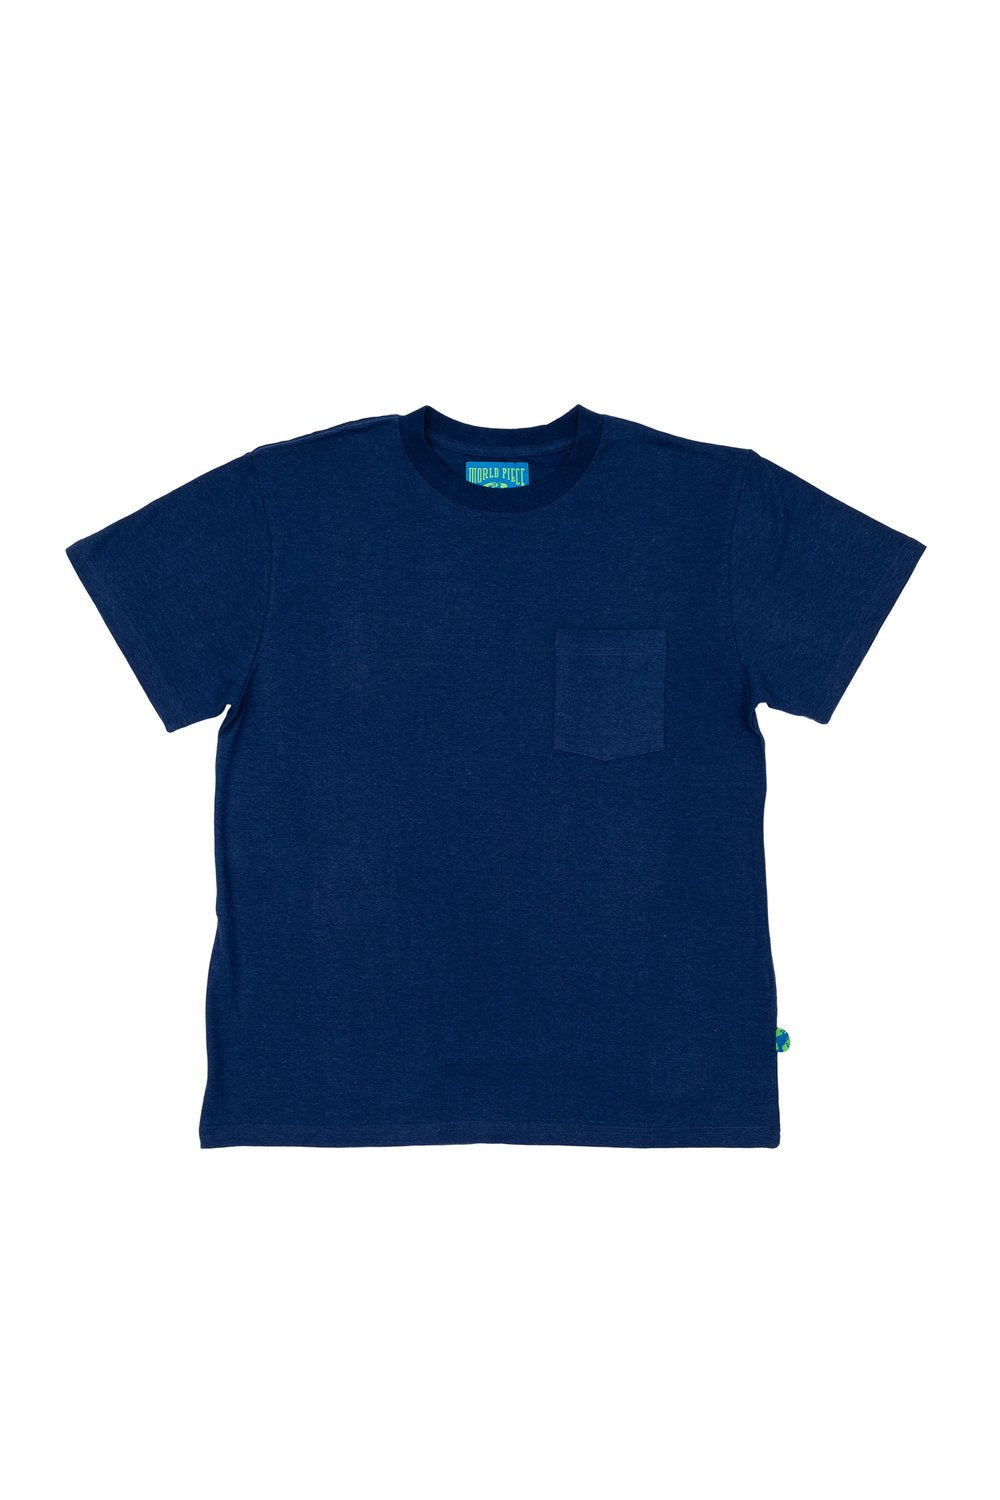 World Piece by Mister Green - Pocket Tee - Navy / S